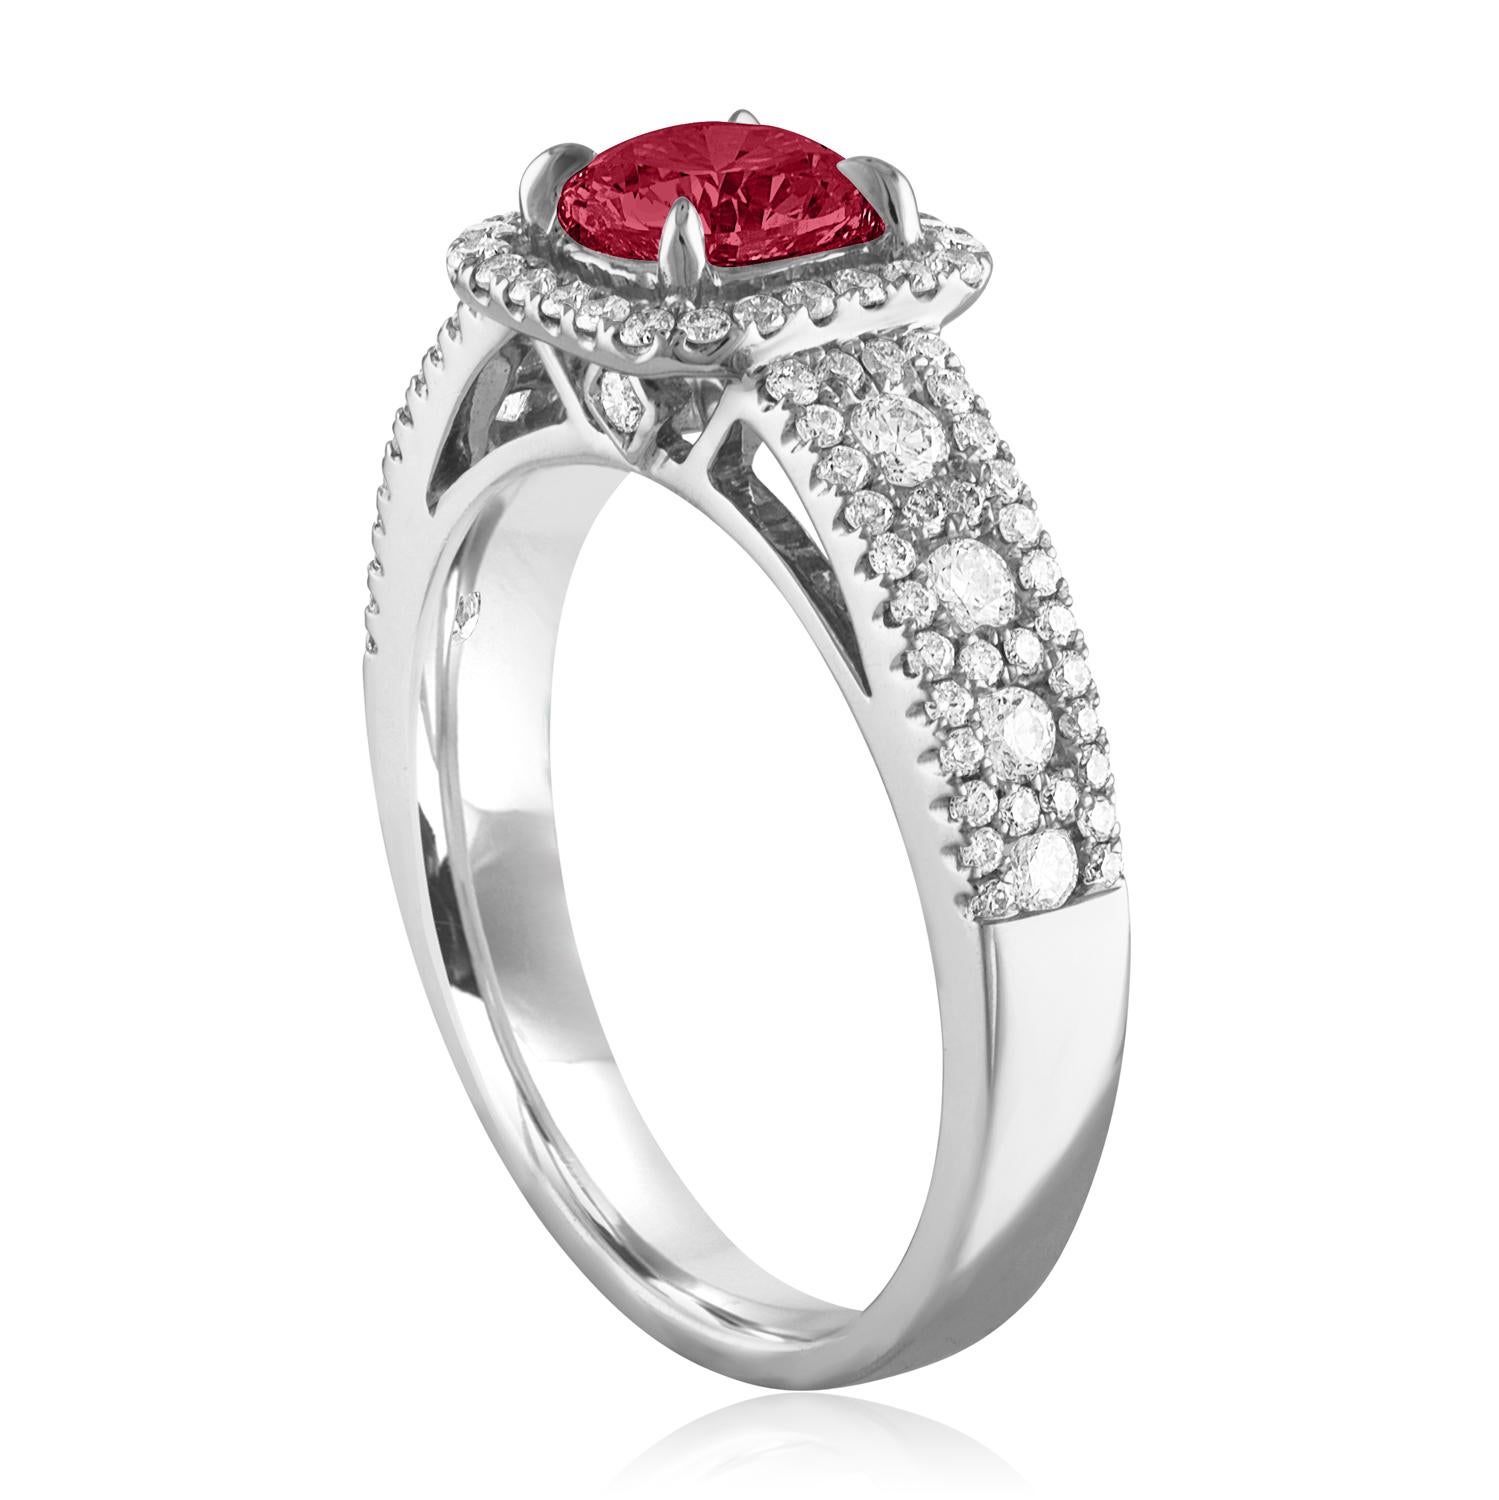 Beautiful Square Halo Ring
The ring is 18K White Gold
The Center Stone is a Round Ruby 0.87 Carats
The Ruby is AGL Certified Heated
There are 0.56 Carats in Diamonds F/G VS/SI
The ring is a size 6.5, sizable.
The ring weighs 4.3 grams